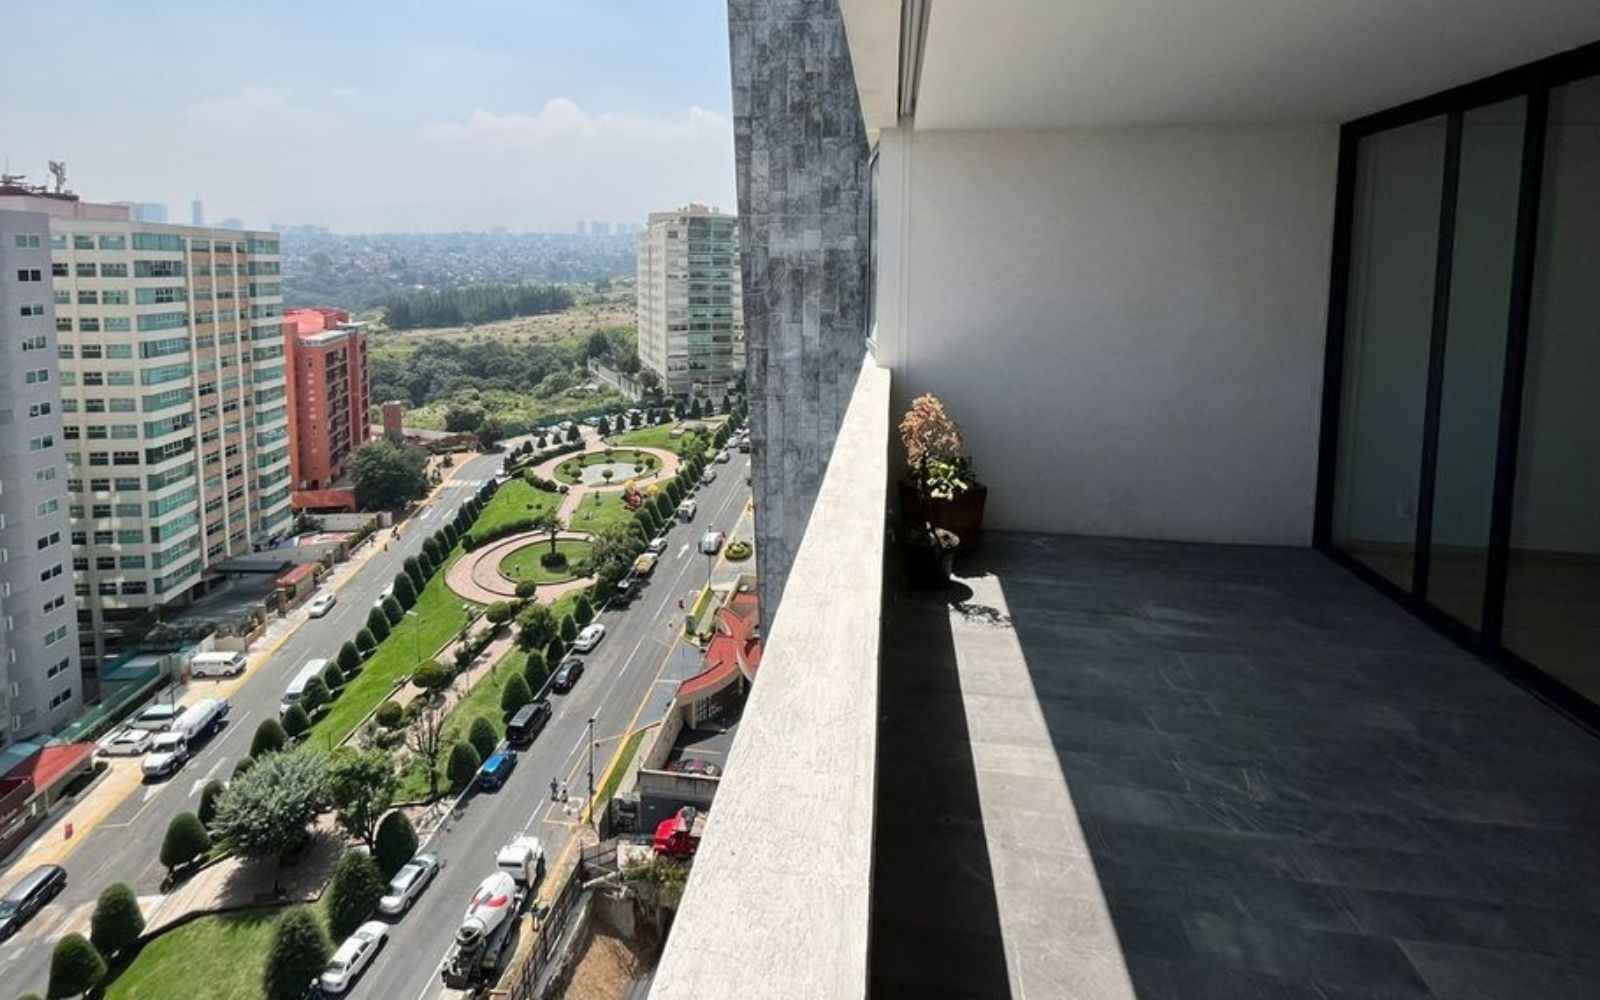 204 m2 condo with high ceilings, in Bosque Real, pet-friendly, covered pool, spa, playground, Huixquilucan Mexico City